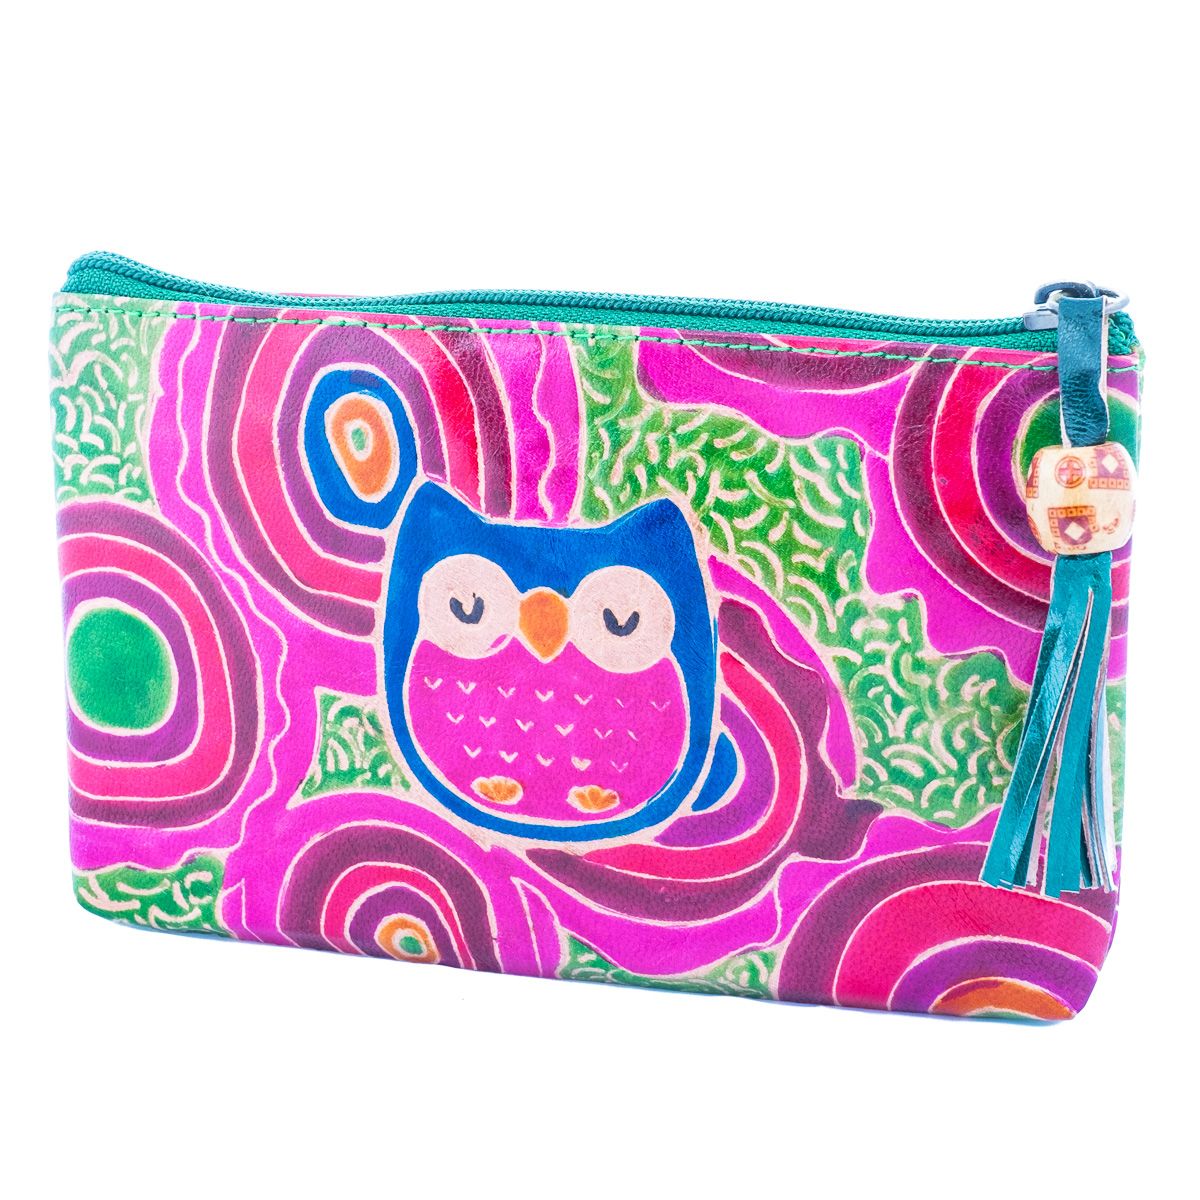 Leather wallet Owl - green